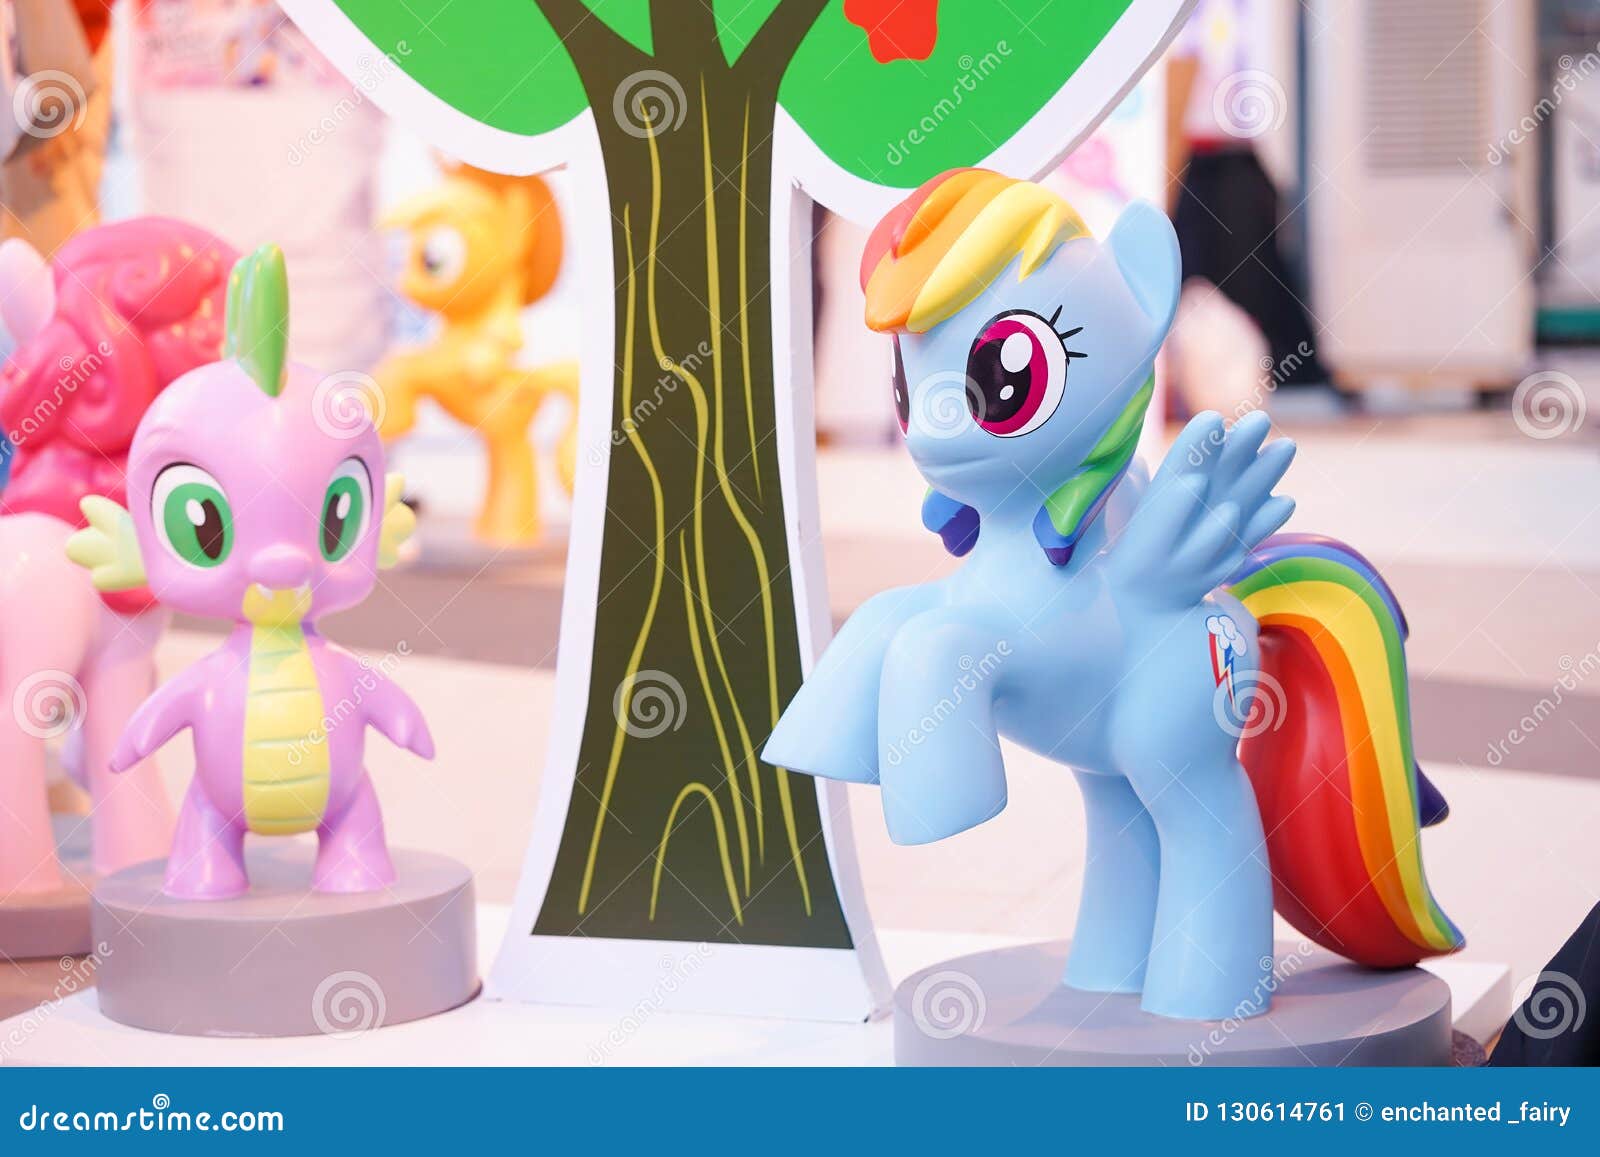 128 My Little Pony Stock Photos - Free & Royalty-Free Stock Photos from  Dreamstime